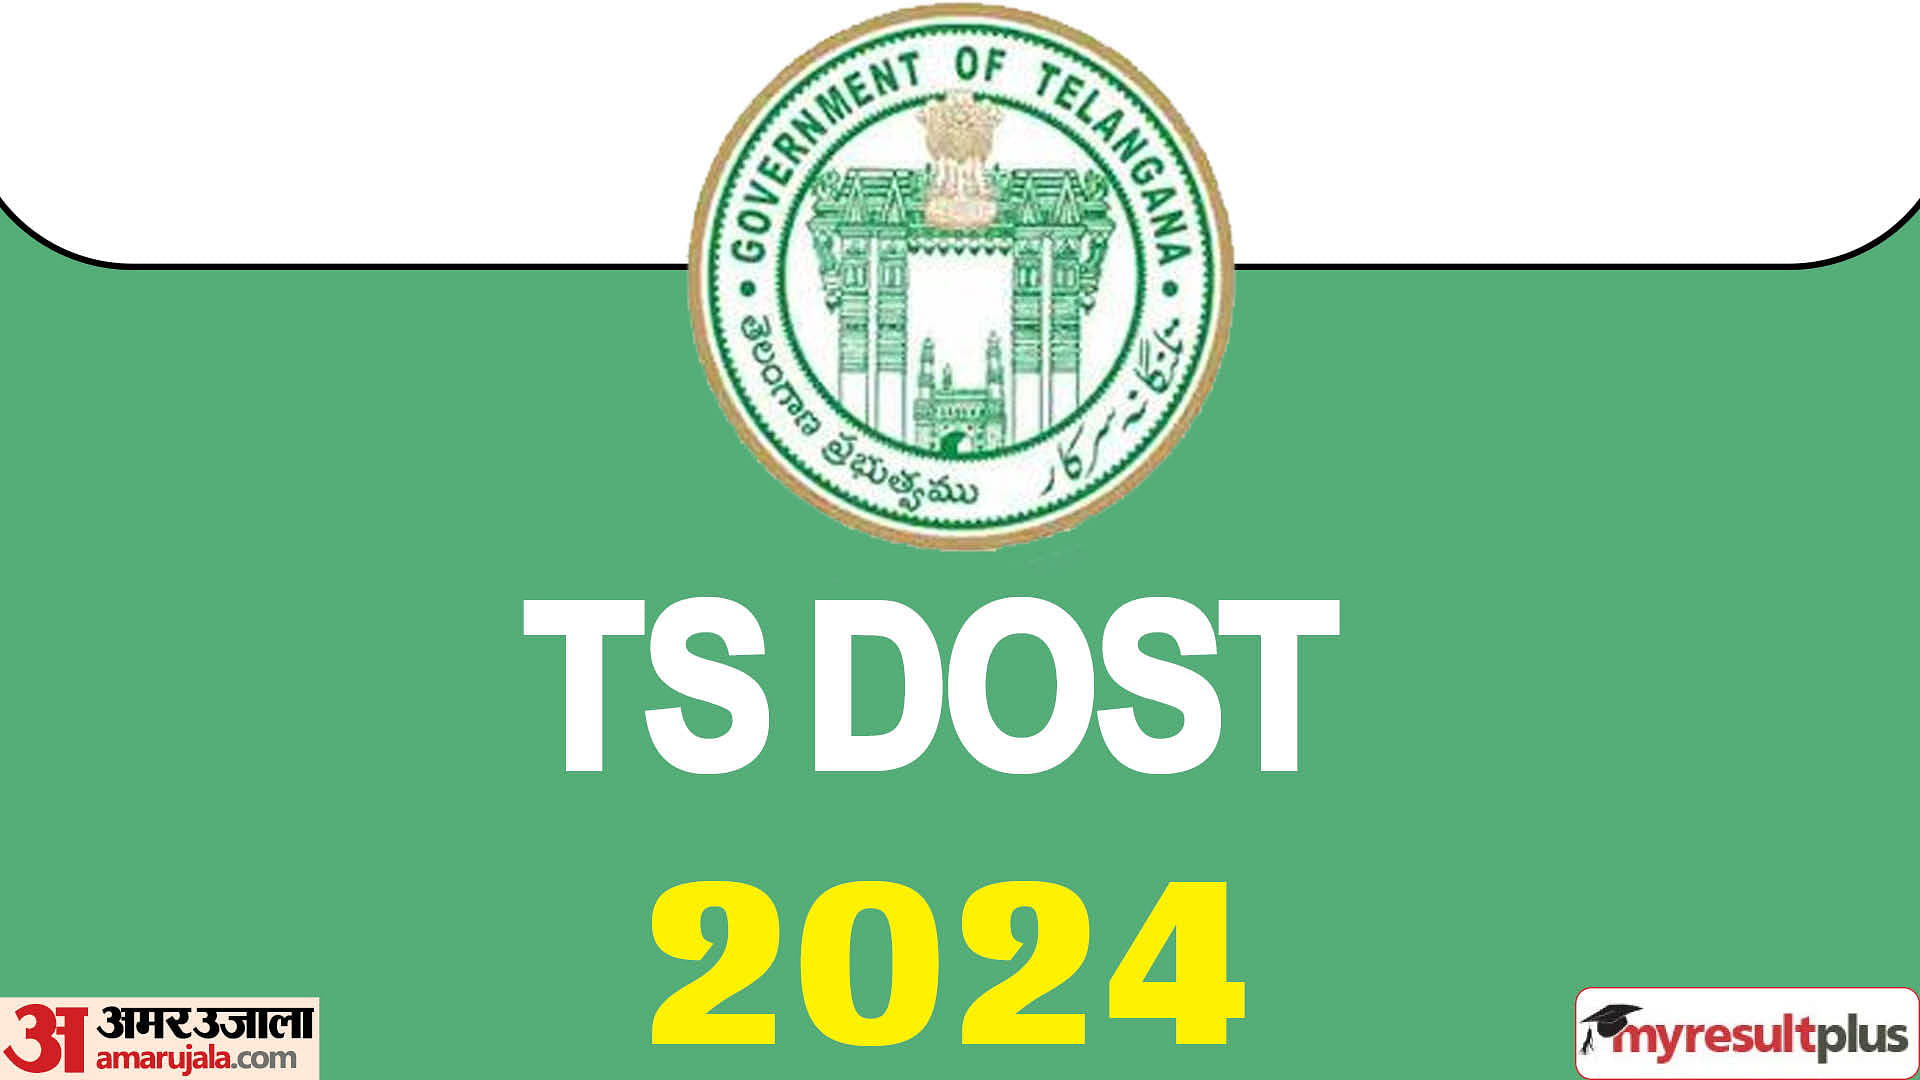 TS DOST 2024 phase 1 registration window open now, Check participating universities and how to apply here